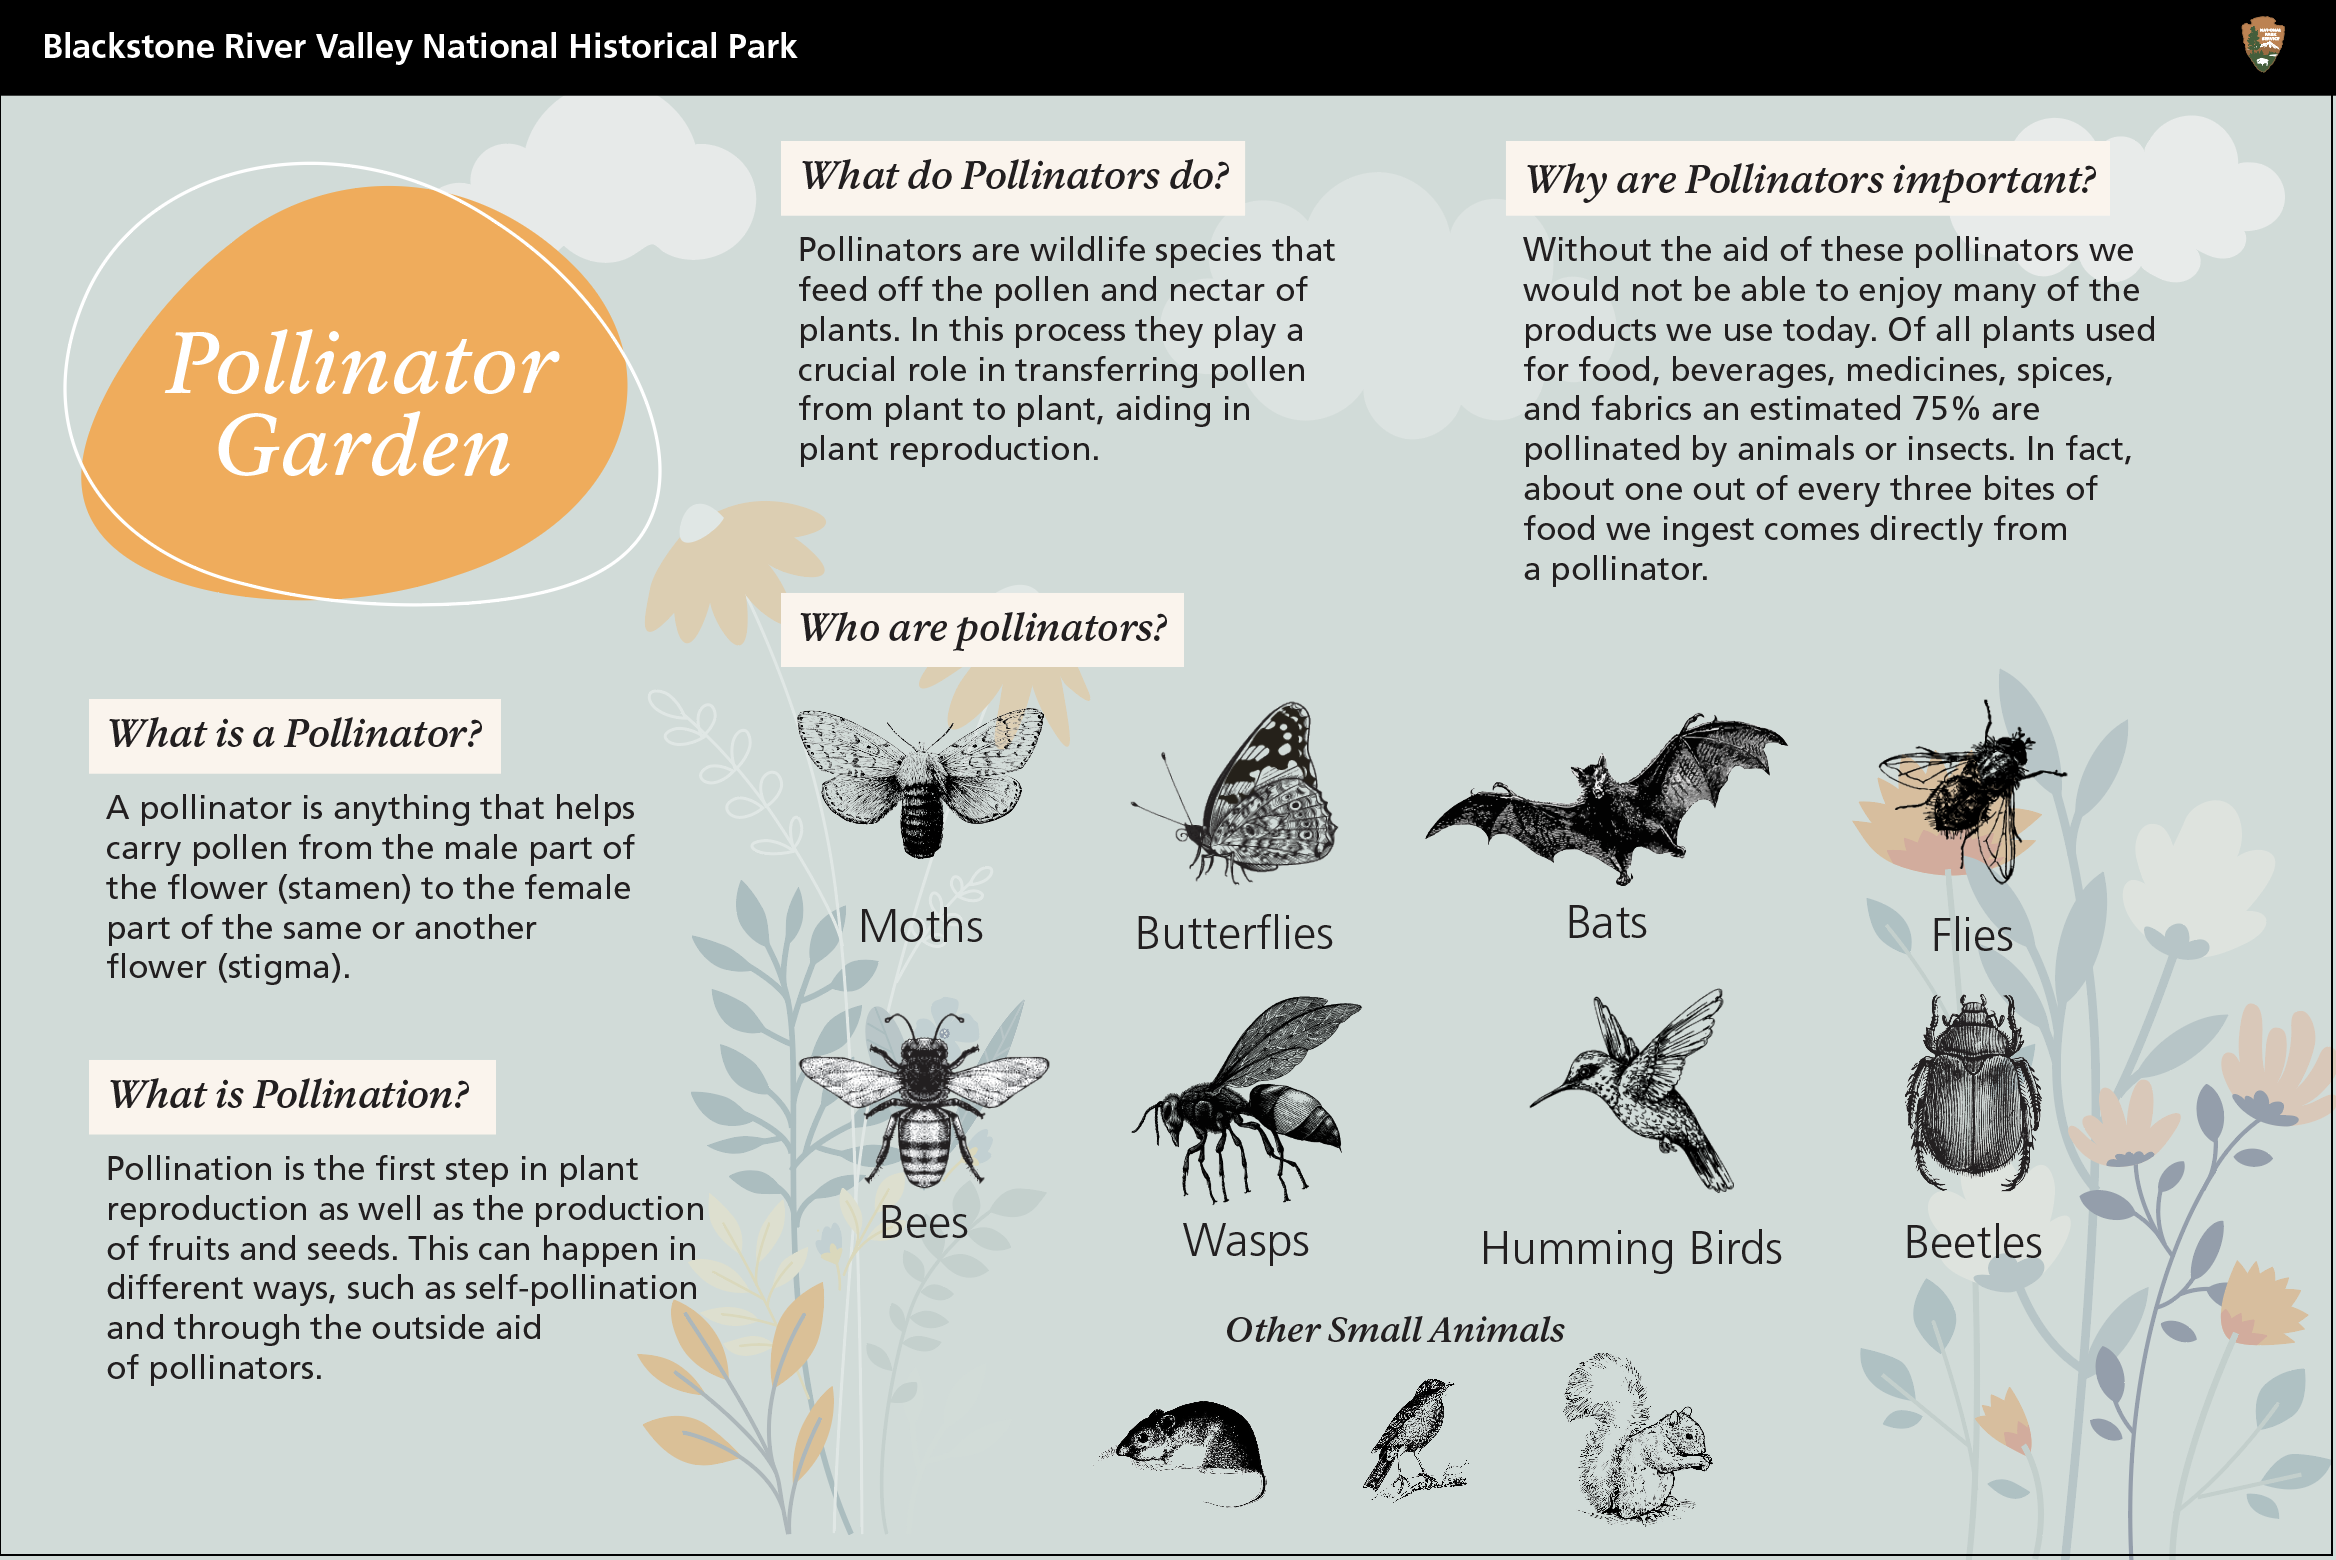 Graphic showing different pollinators and their importance